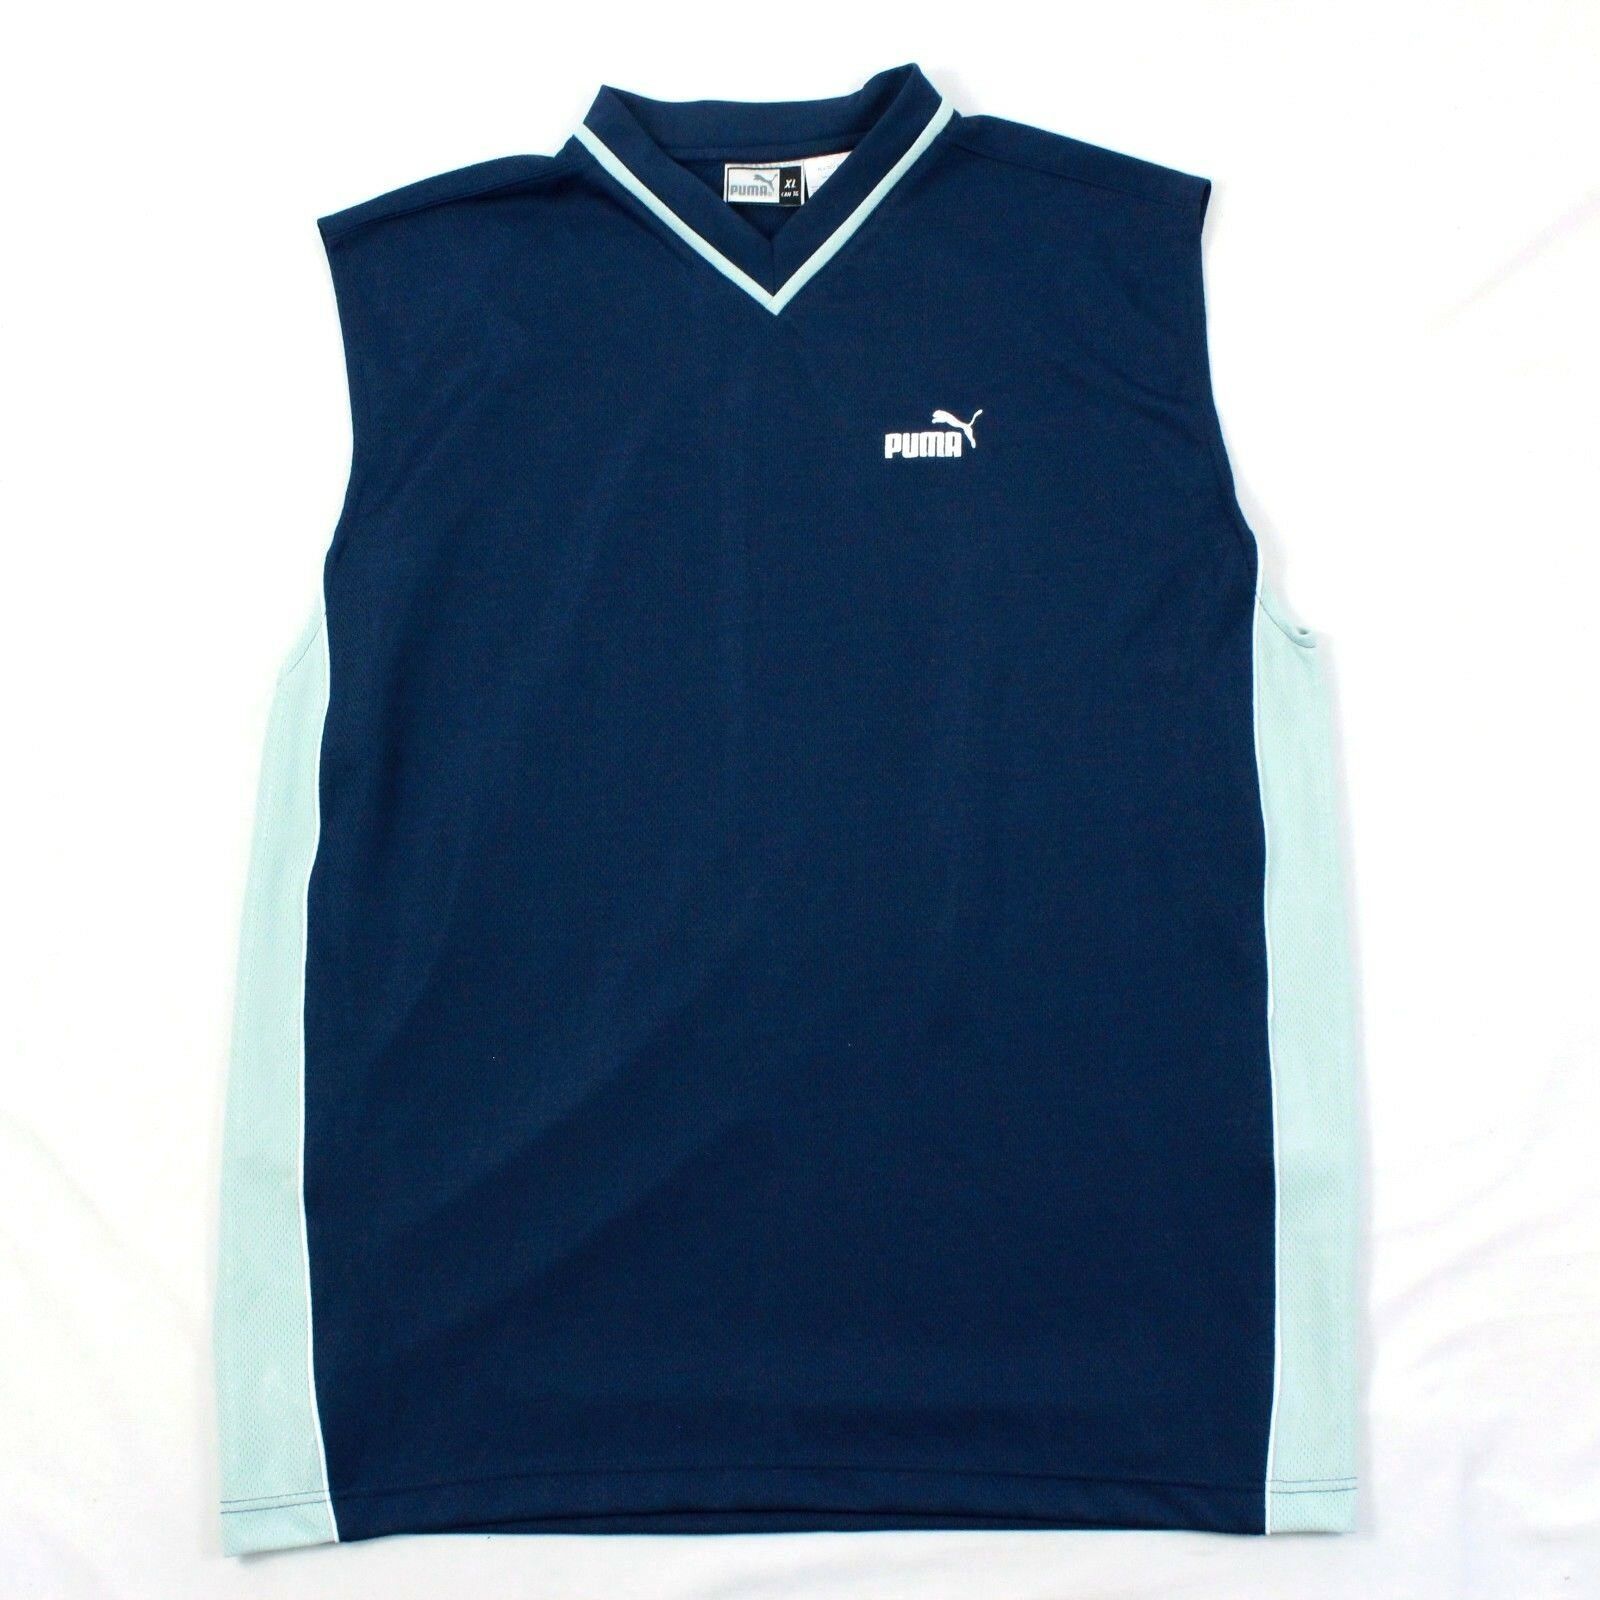 VINTAGE Men's Puma Sleeveless Jersey 1X Extra Large Relaxed Fit Basketball Shirt - $15.14